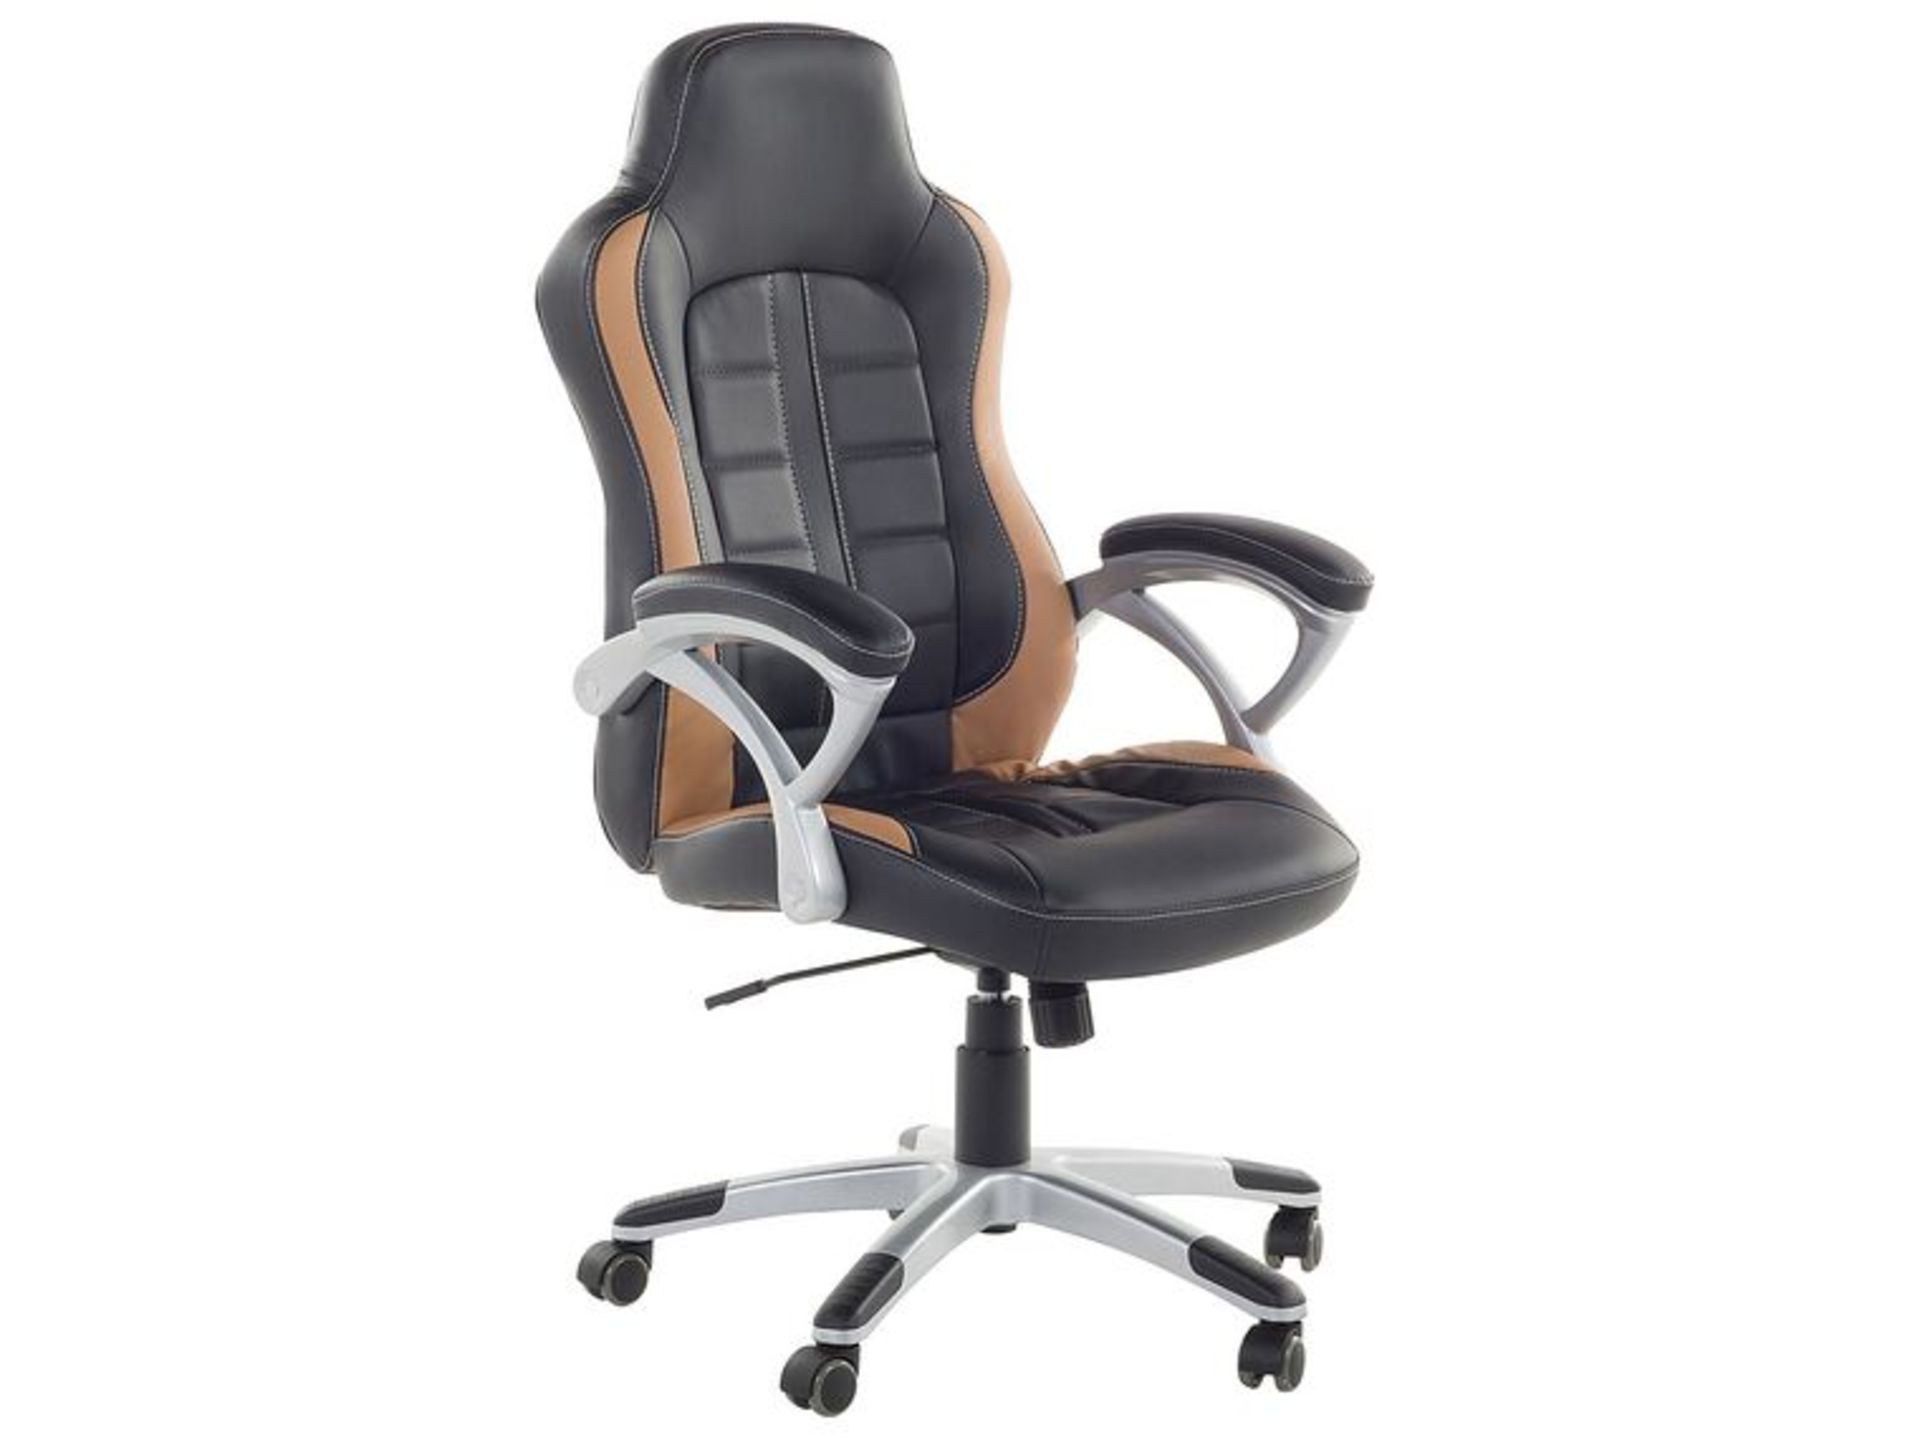 Prince Executive Chair Black with Golden Brown. - ER30. RRP £199.99. Carefully selected pieces of